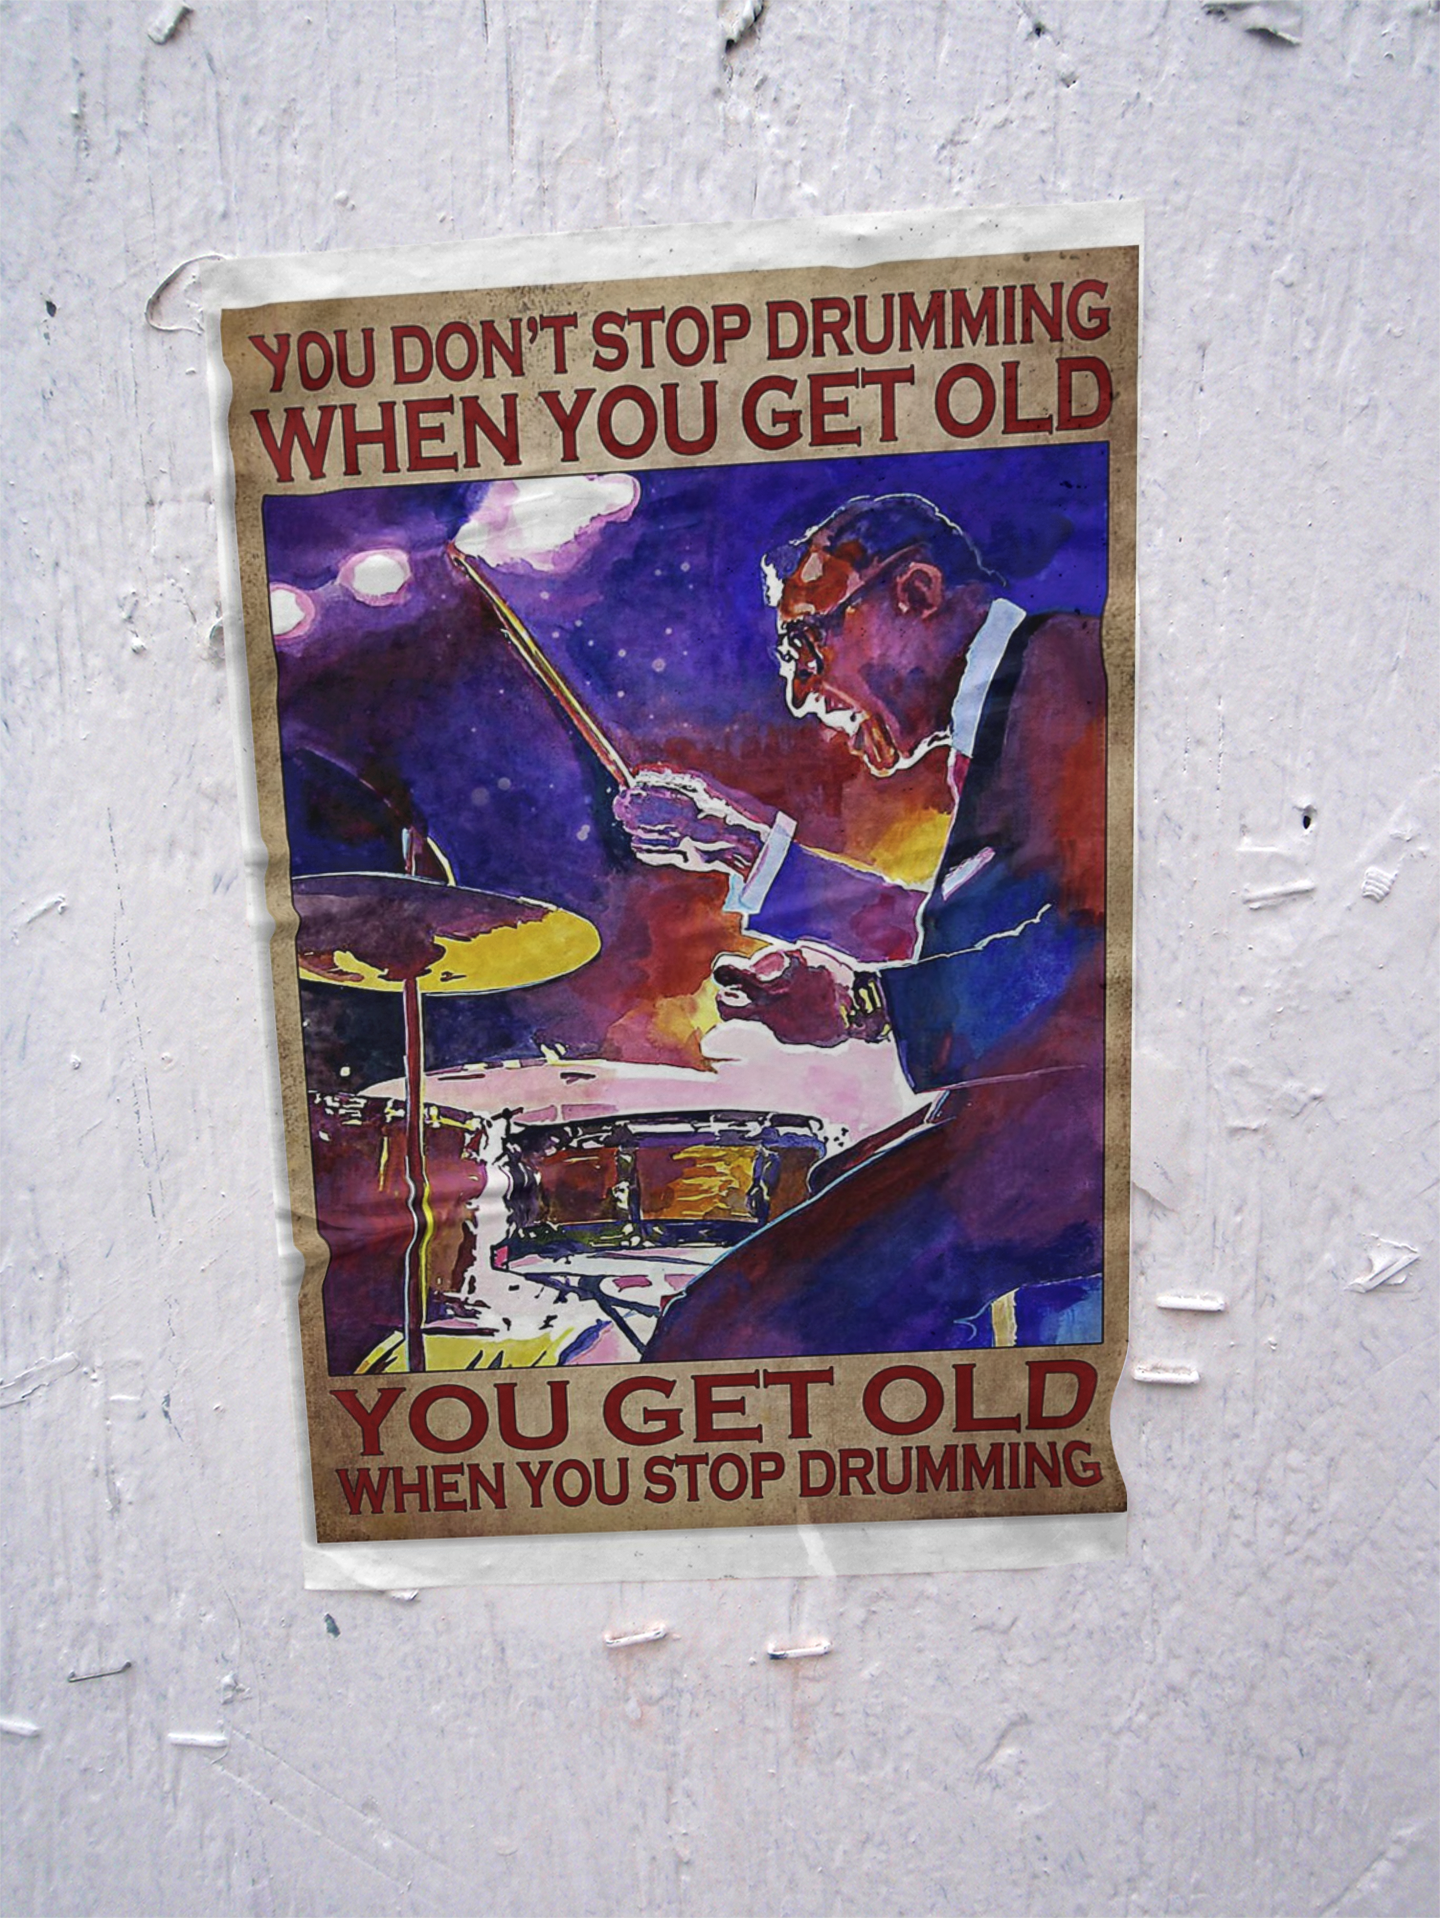 Drummer you don't stop drumming when you get old poster 3